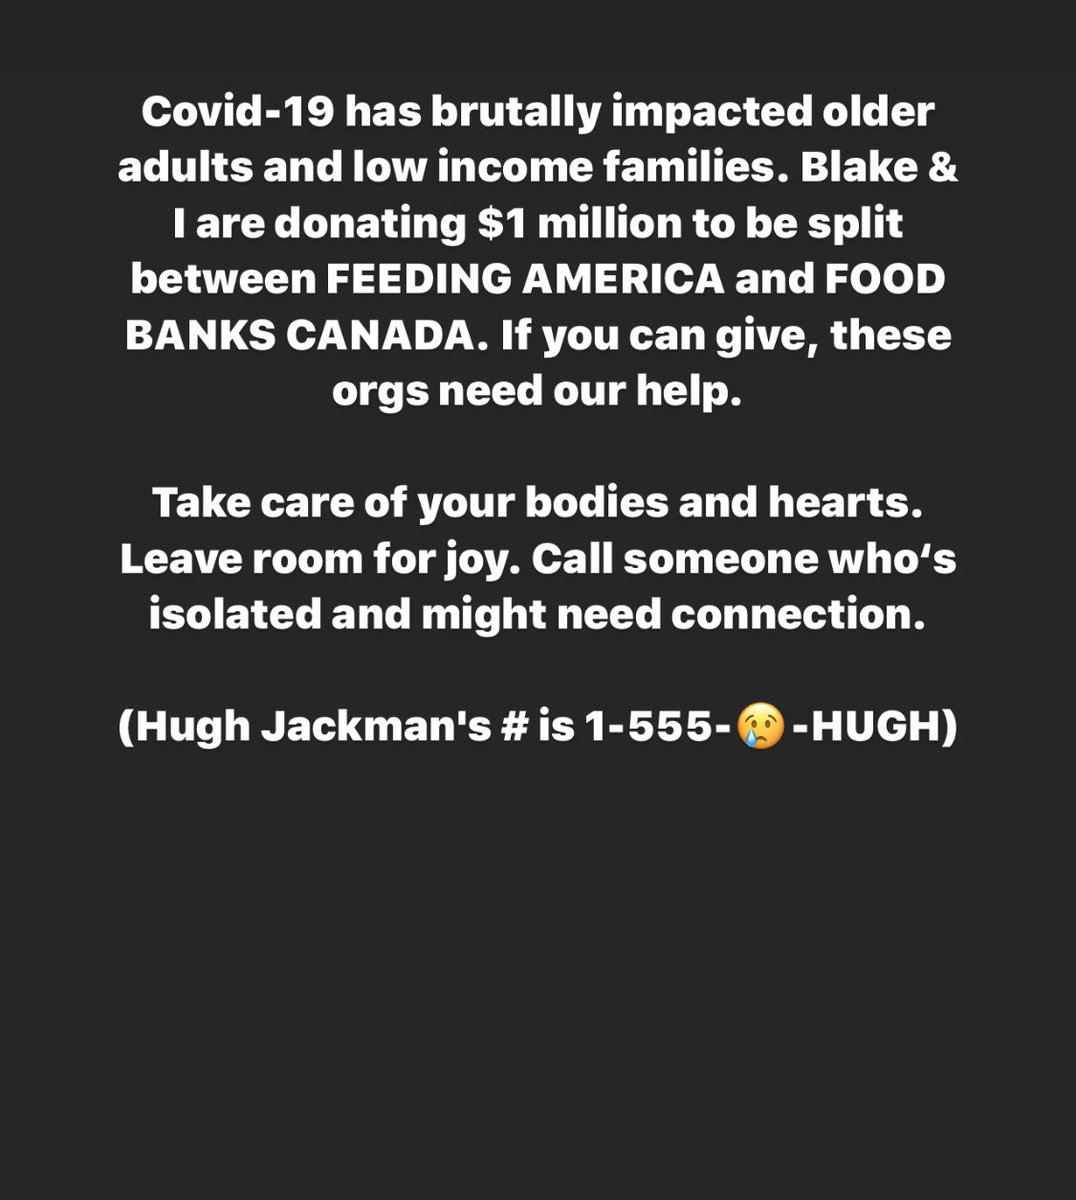 I think we can all agree, Covid-19 is an asshole. If you can help, visit, FeedingAmerica.org and/or FoodBanksCanada.ca